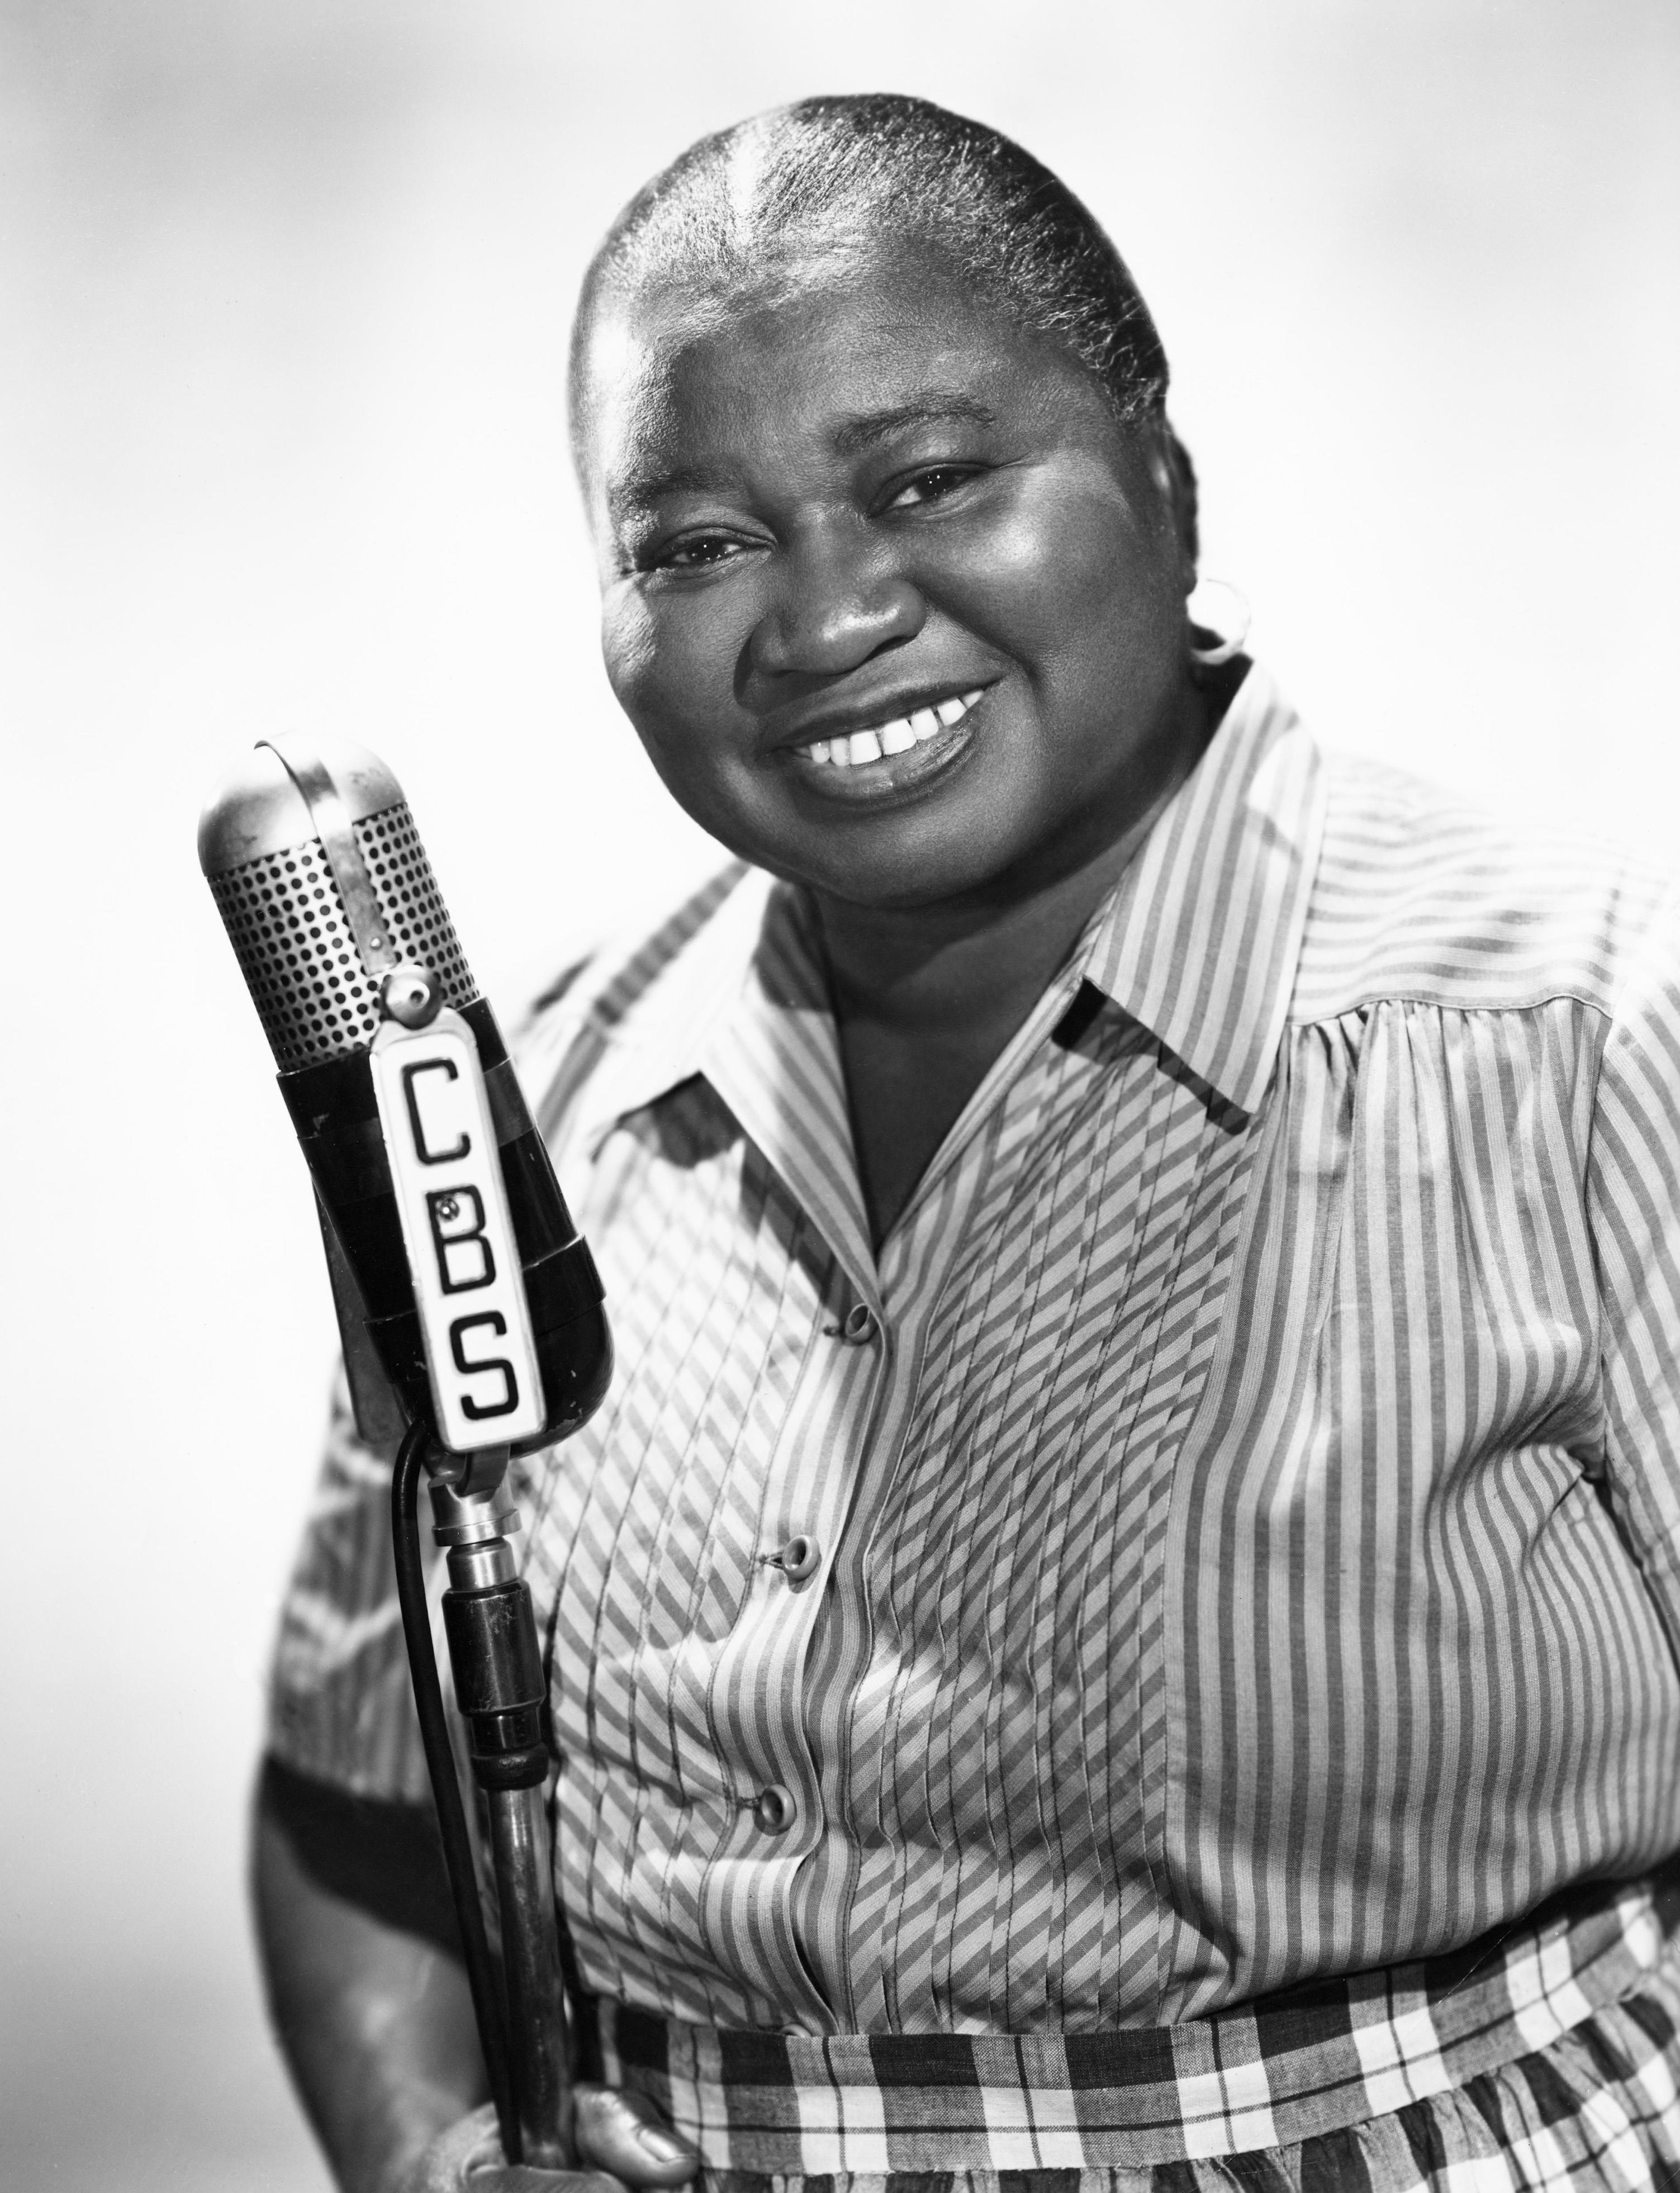 <p>"Gone With the Wind" star Hattie McDaniel won the Academy Award for best supporting actress in 1940 for her performance as Mammy in the classic film -- making her the first Black performer to take home an Oscar.</p>